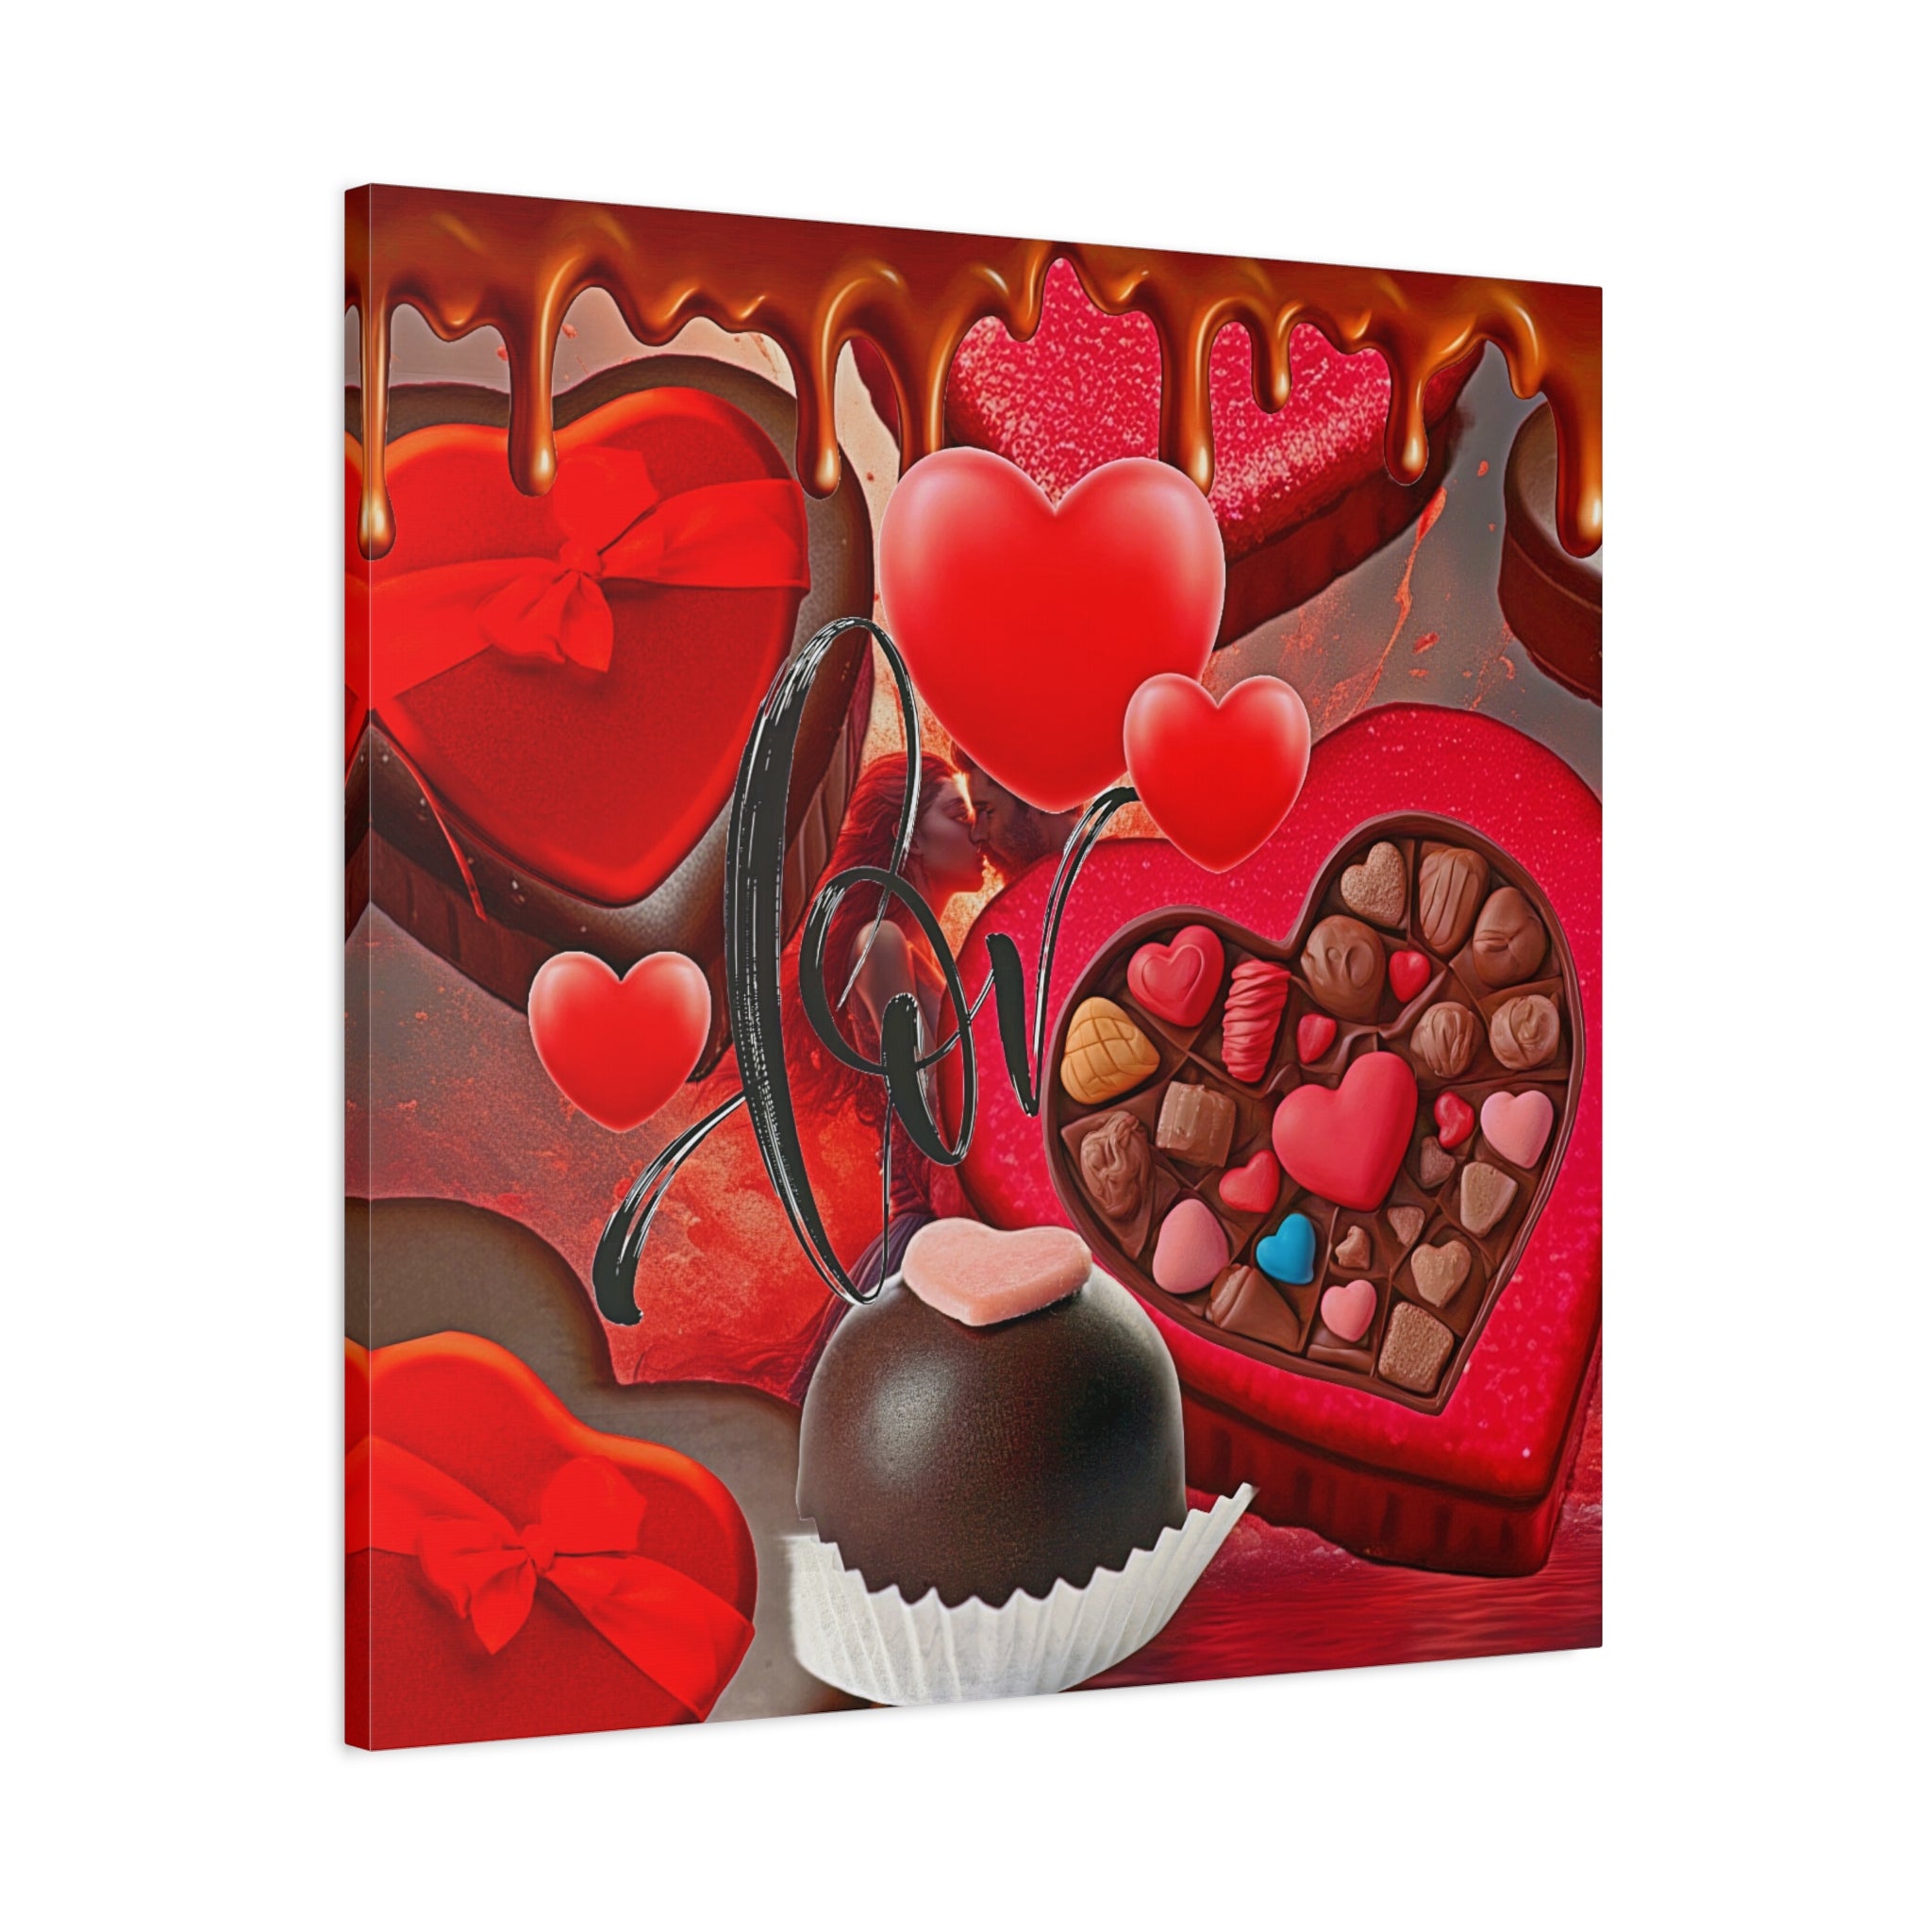 Wall Art CHOCOLATE Canvas Print Painting Original Giclee 32X32 GW Love Nice Beauty Fun Design Fit Hot House Home Office Gift Ready Hang Living